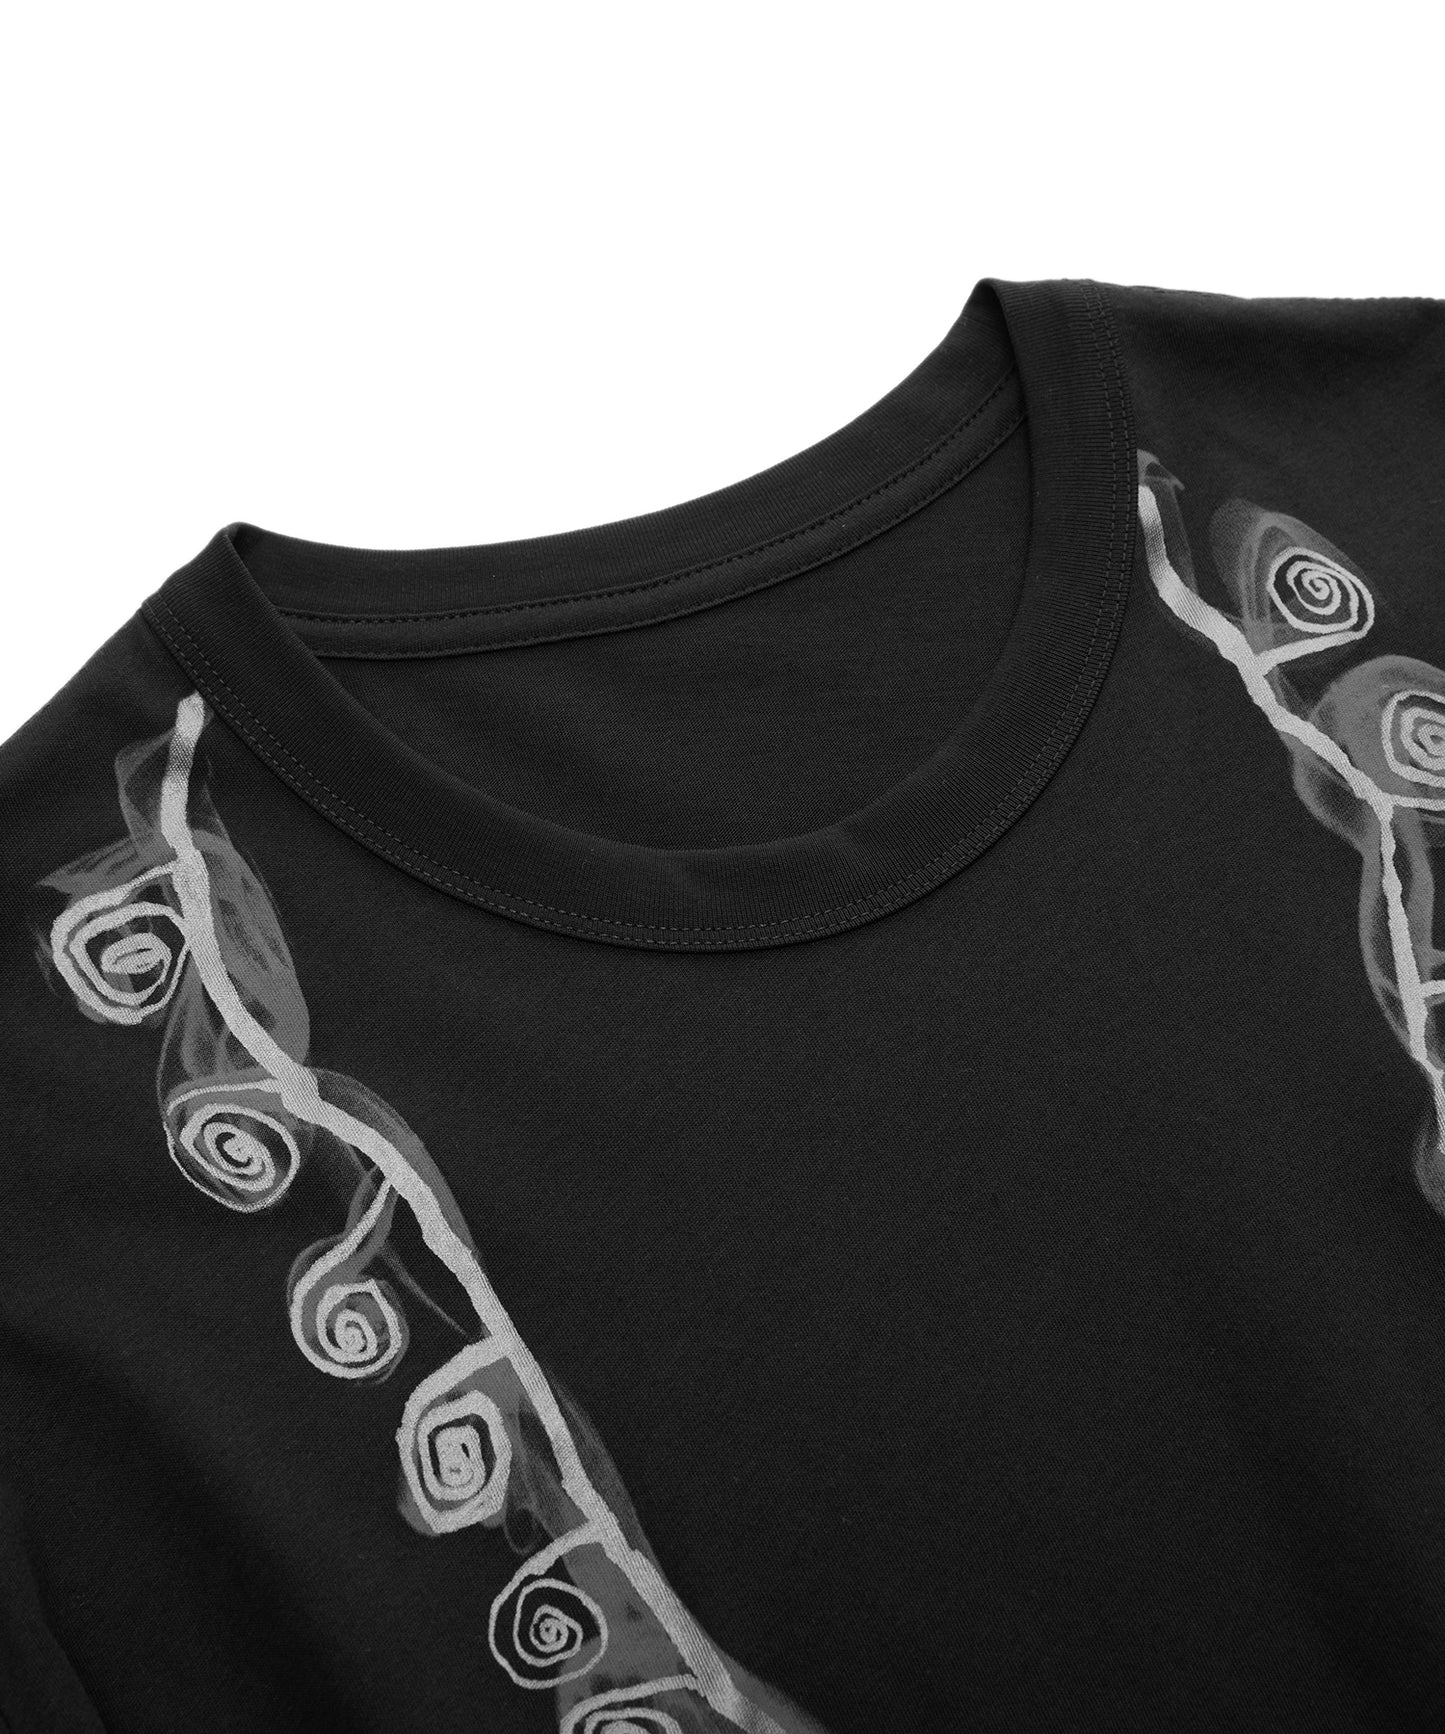 Miao Silver Necklace-print T-shirt